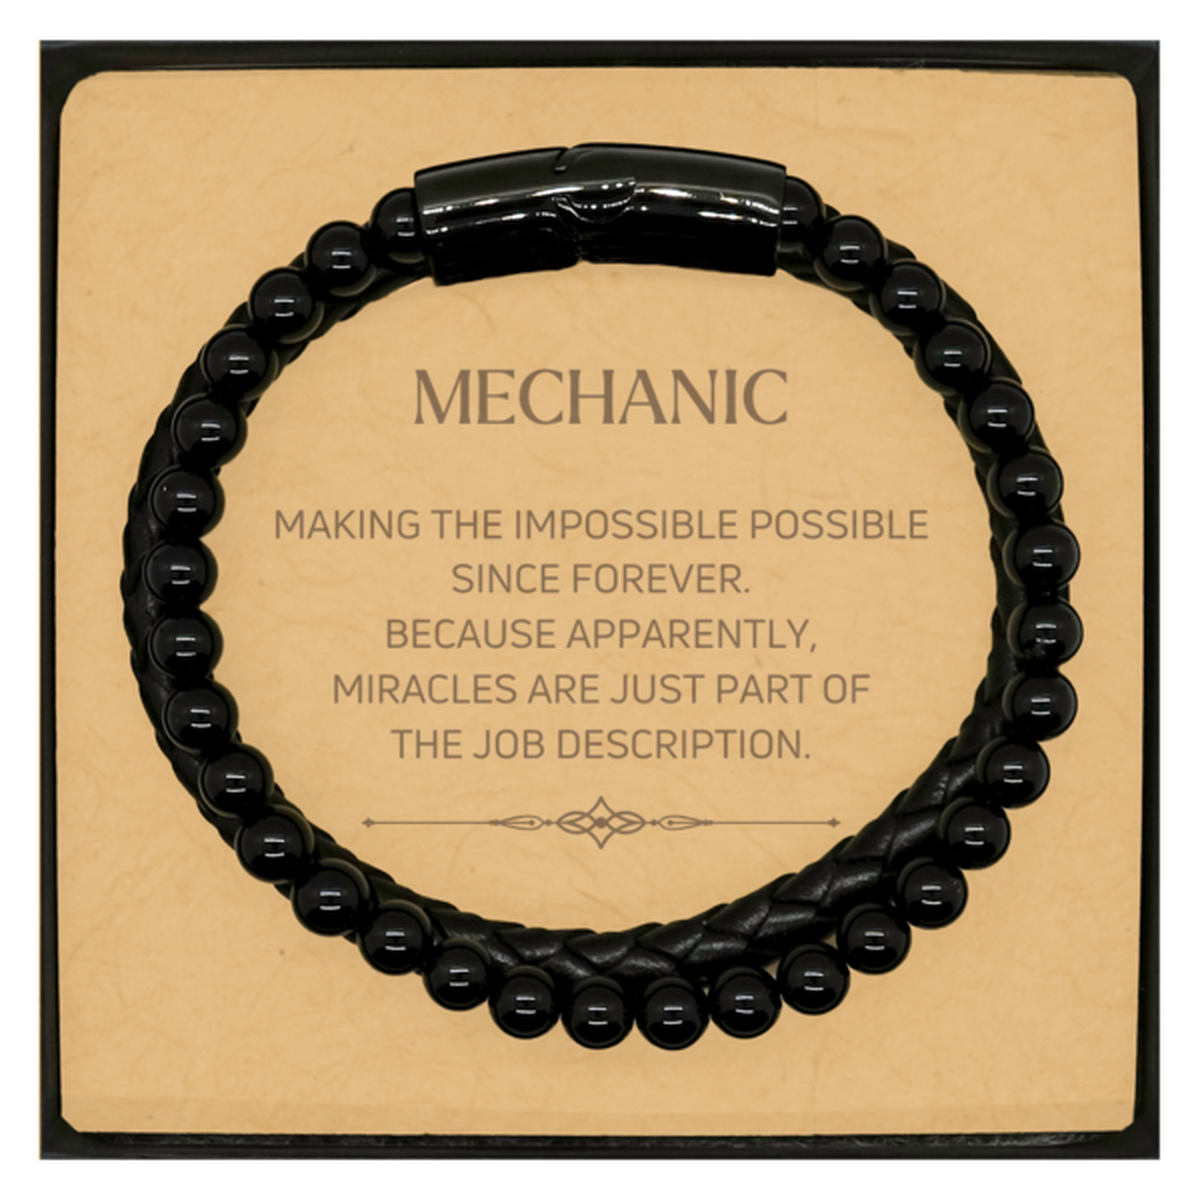 Funny Mechanic Gifts, Miracles are just part of the job description, Inspirational Birthday Christmas Stone Leather Bracelets For Mechanic, Men, Women, Coworkers, Friends, Boss